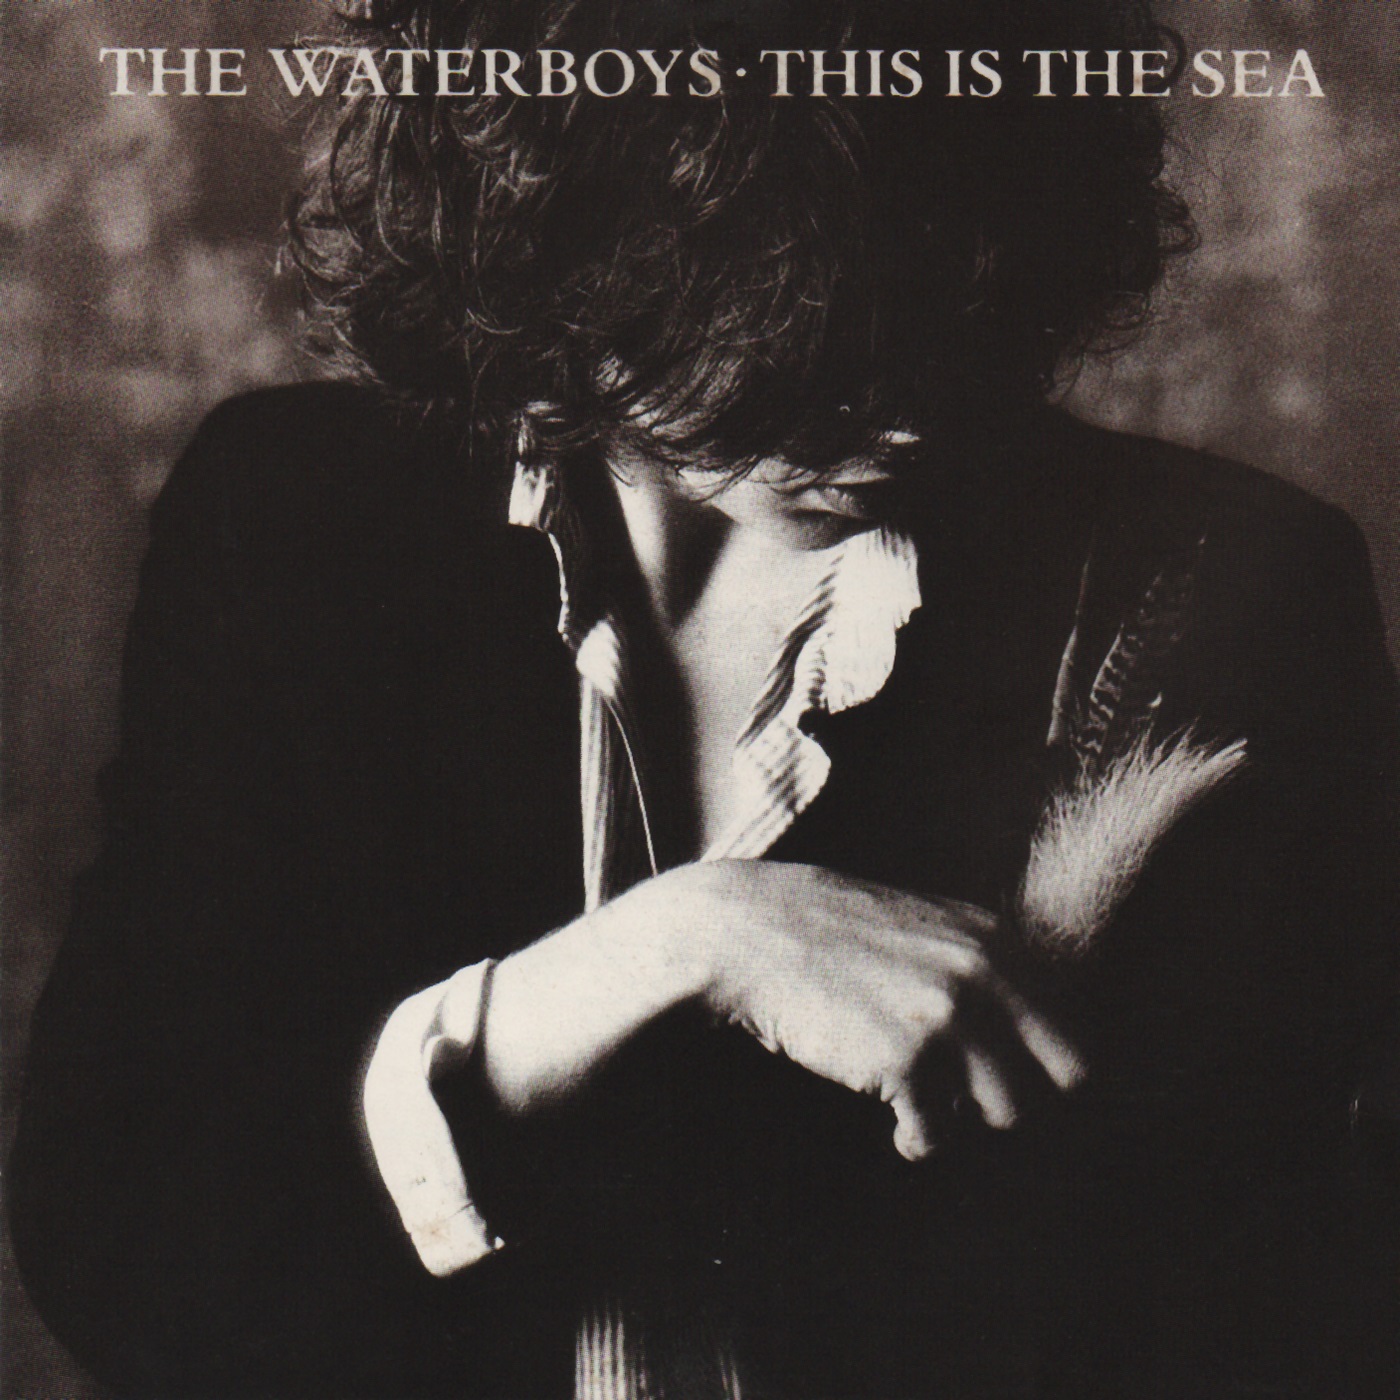 The Waterboys - 1985 - This is the Sea [CDP 3215432]